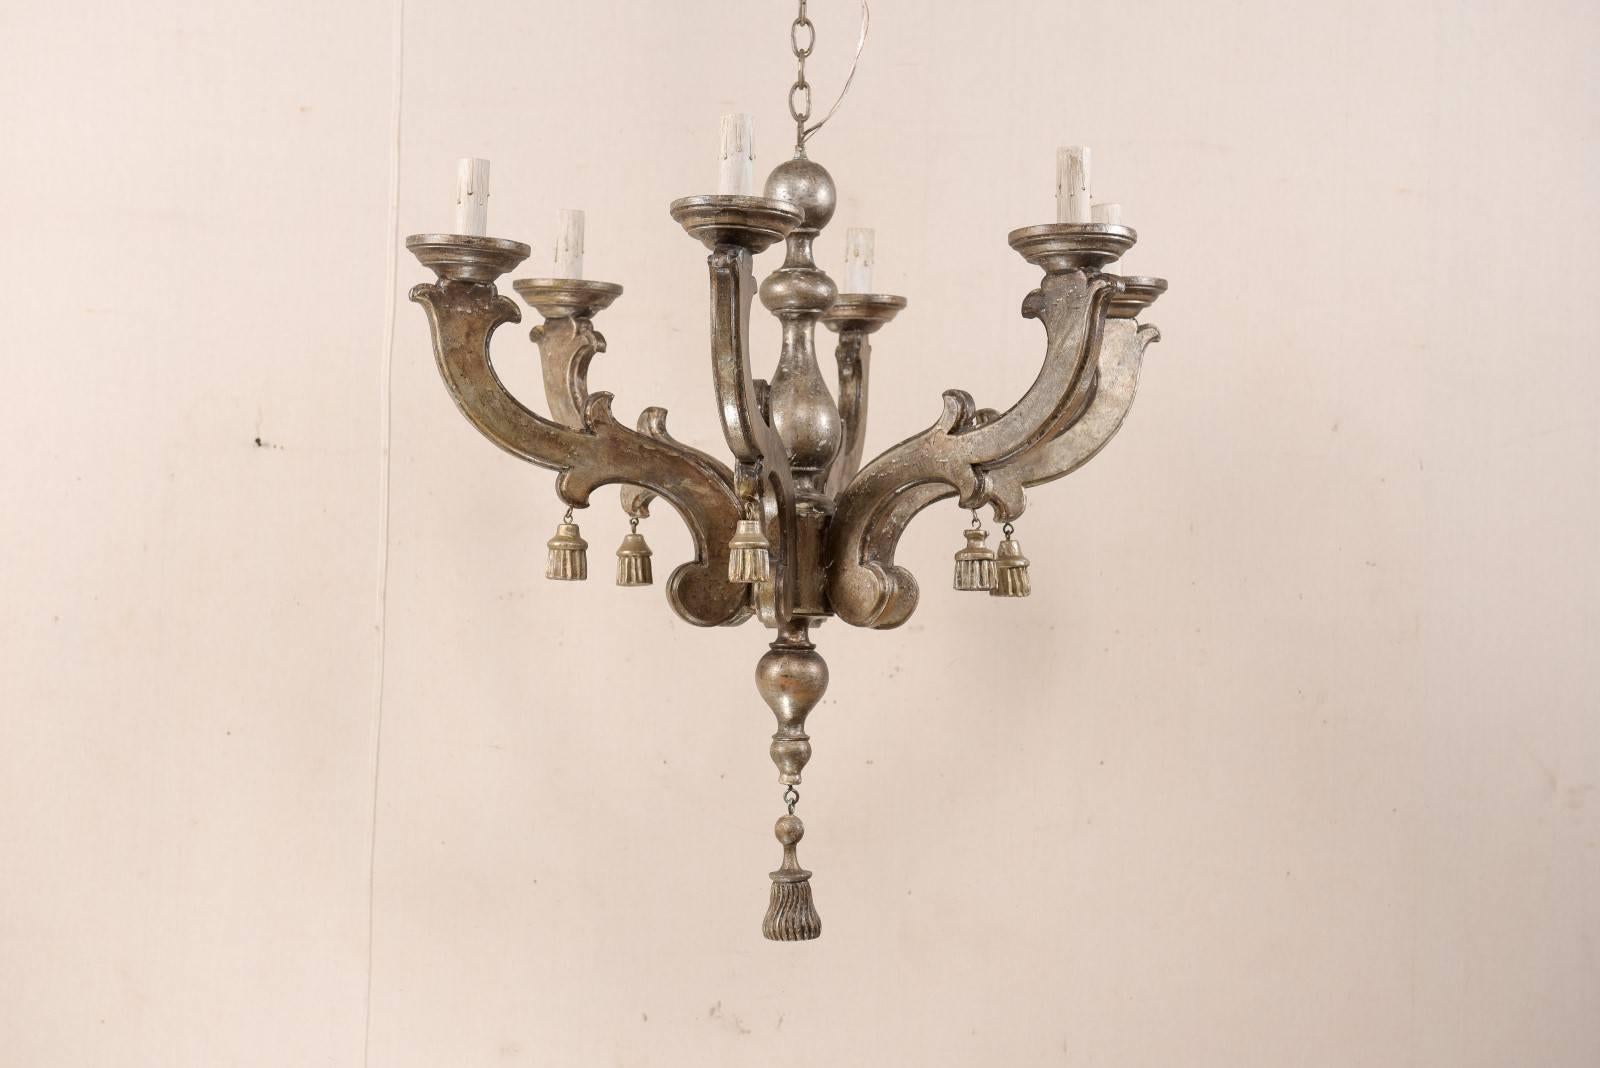 An Italian carved and painted wood chandelier from the mid-20th century. This exquisite Italian chandelier features a turned central column with six flat-sided carved foliage arms emerging from the center. Carved wood tassels hang about the